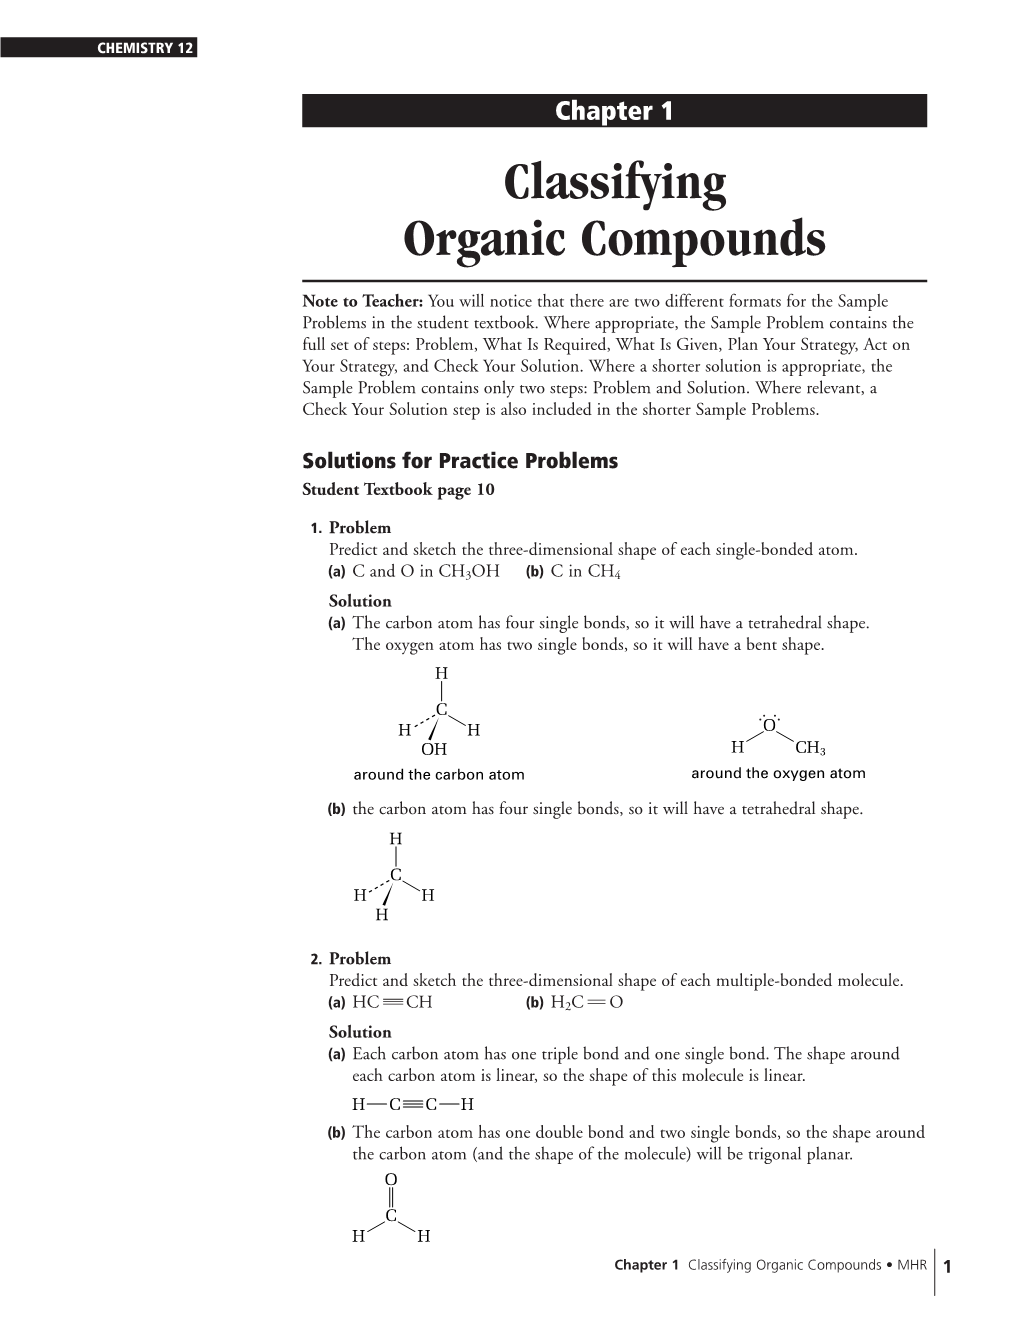 Chapter 1 Classifying Organic Compounds